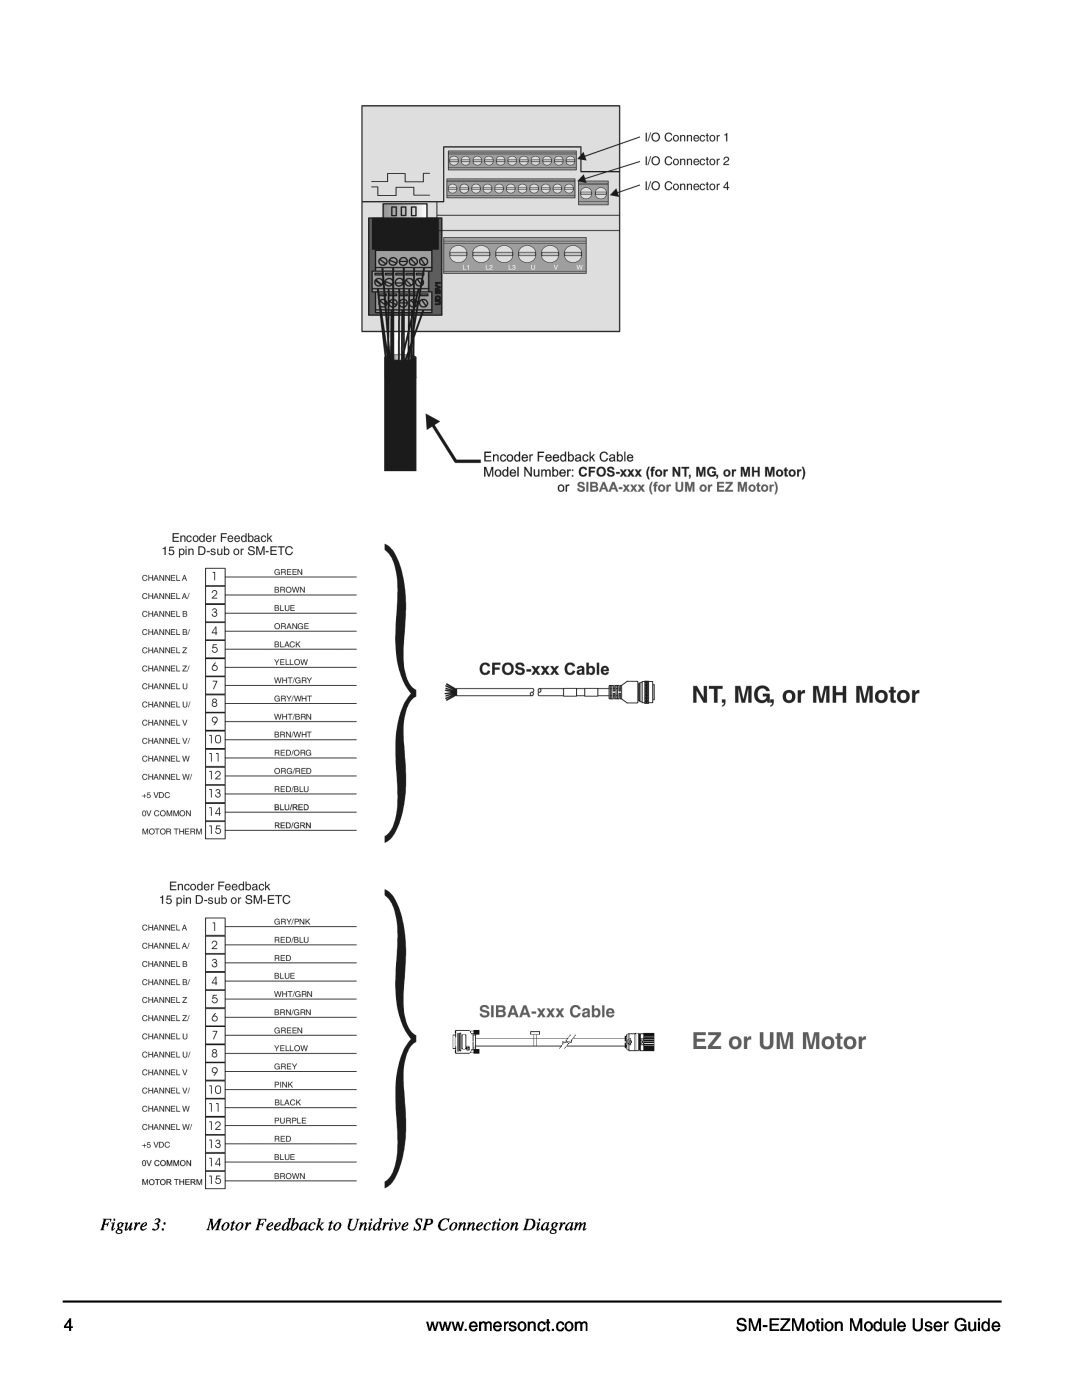 Emerson P/N 400361-00 manual Motor Feedback to Unidrive SP Connection Diagram, NT, MG, or MH Motor, EZ or UM Motor 